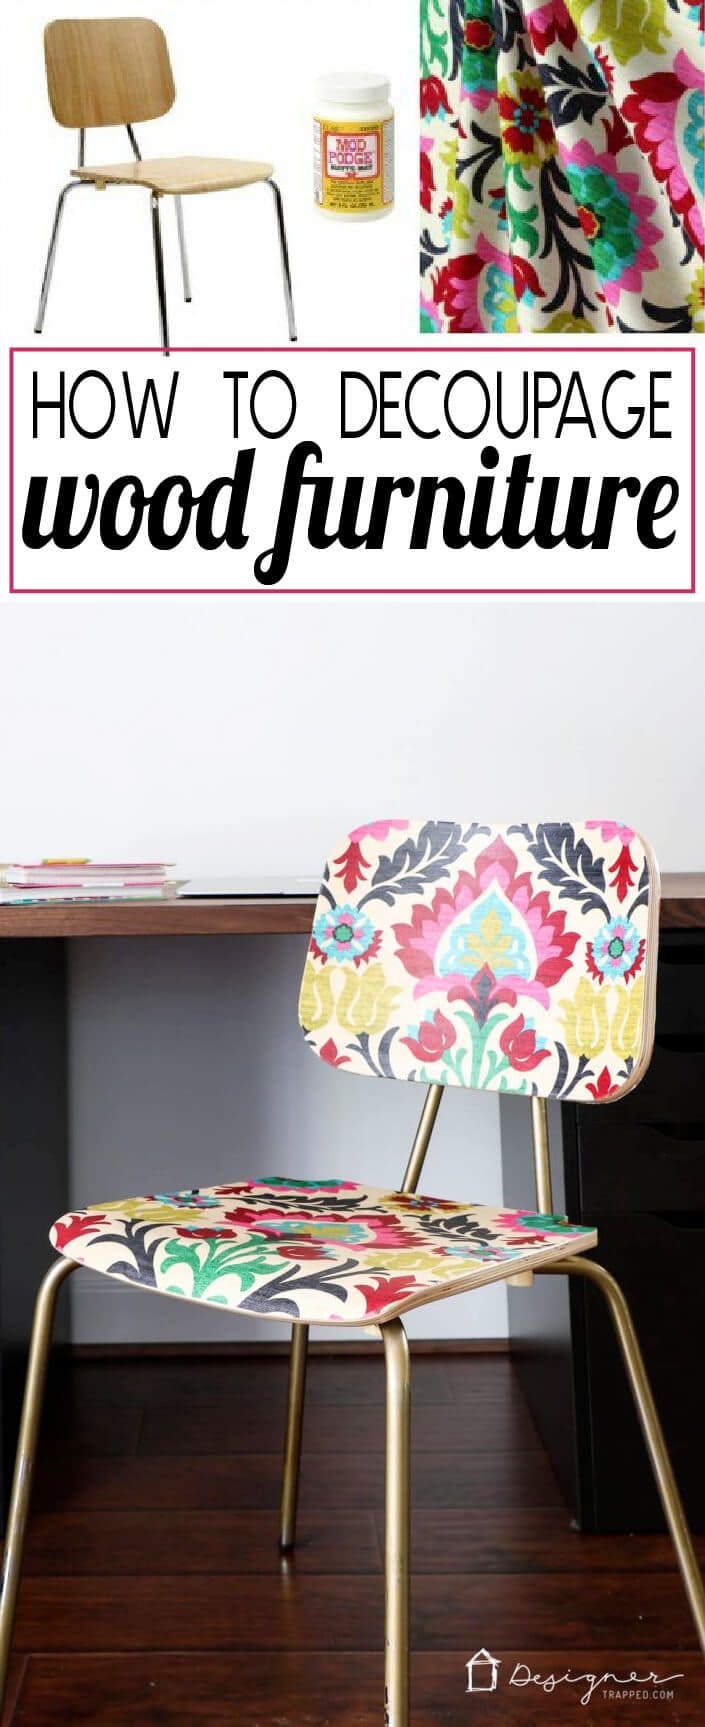 How To Decoupage Furniture For An Upholstered Look Designer Trapped